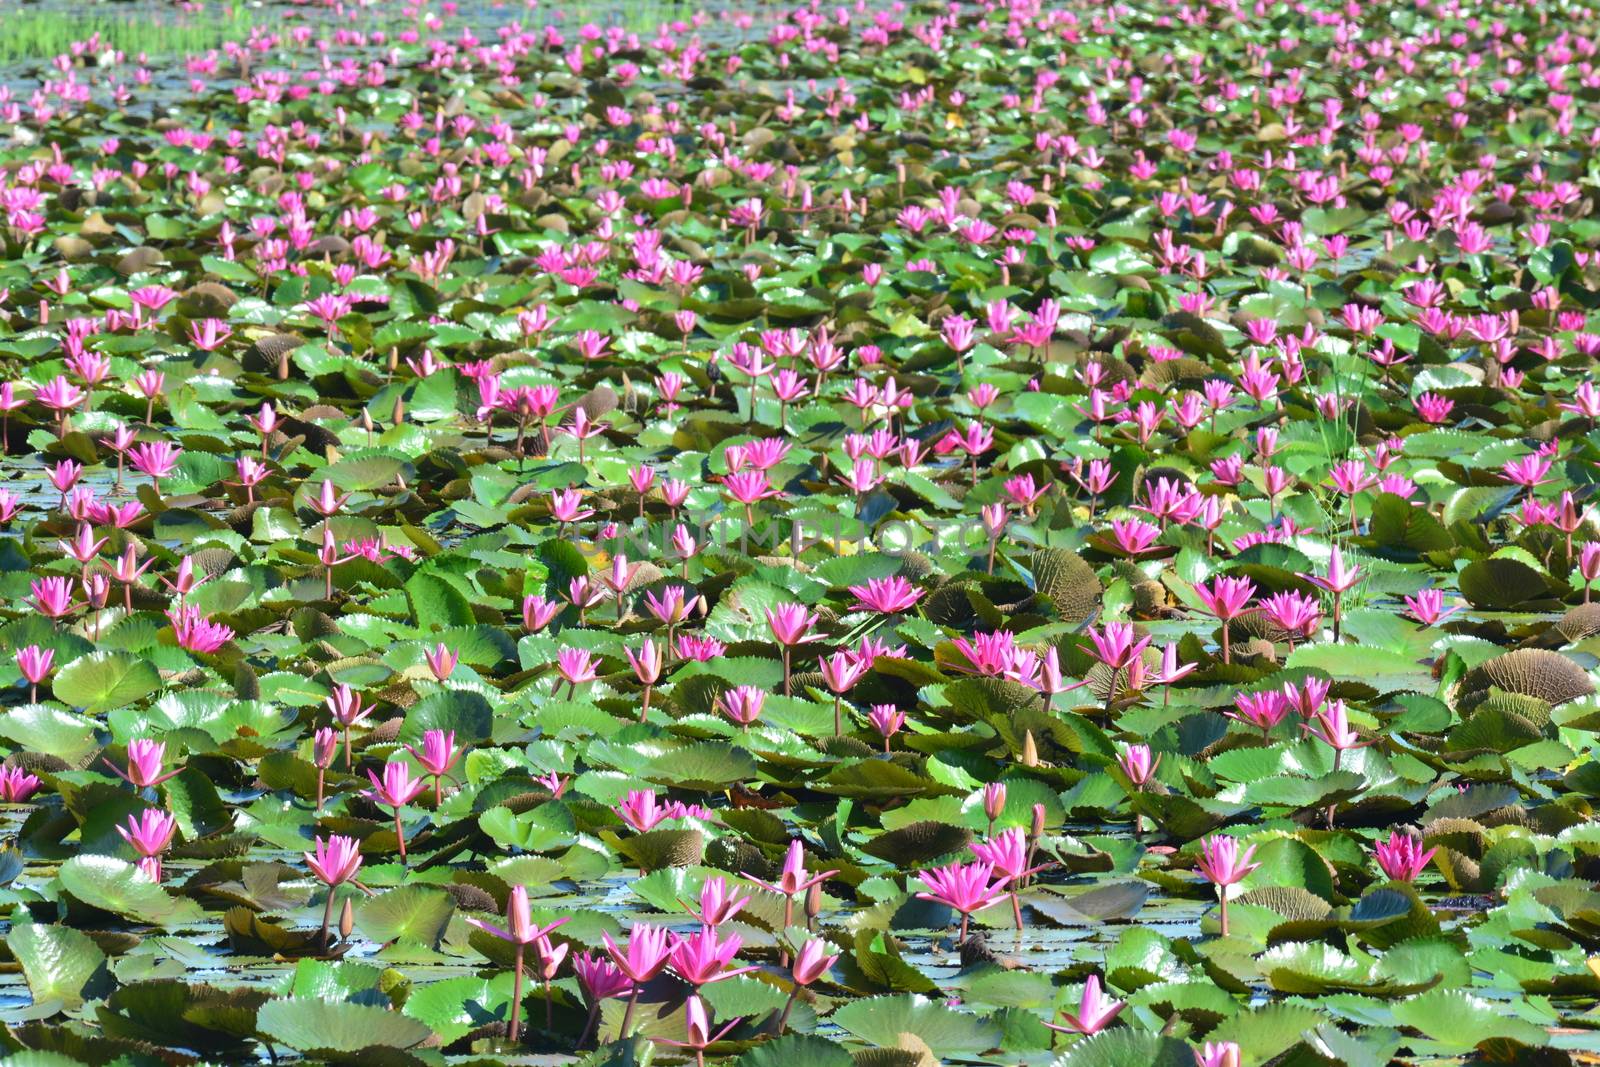 This spectacular site is home to millions of lotus flowers and appropriately named the Red Lotus Sea or Talay Bua Daeng